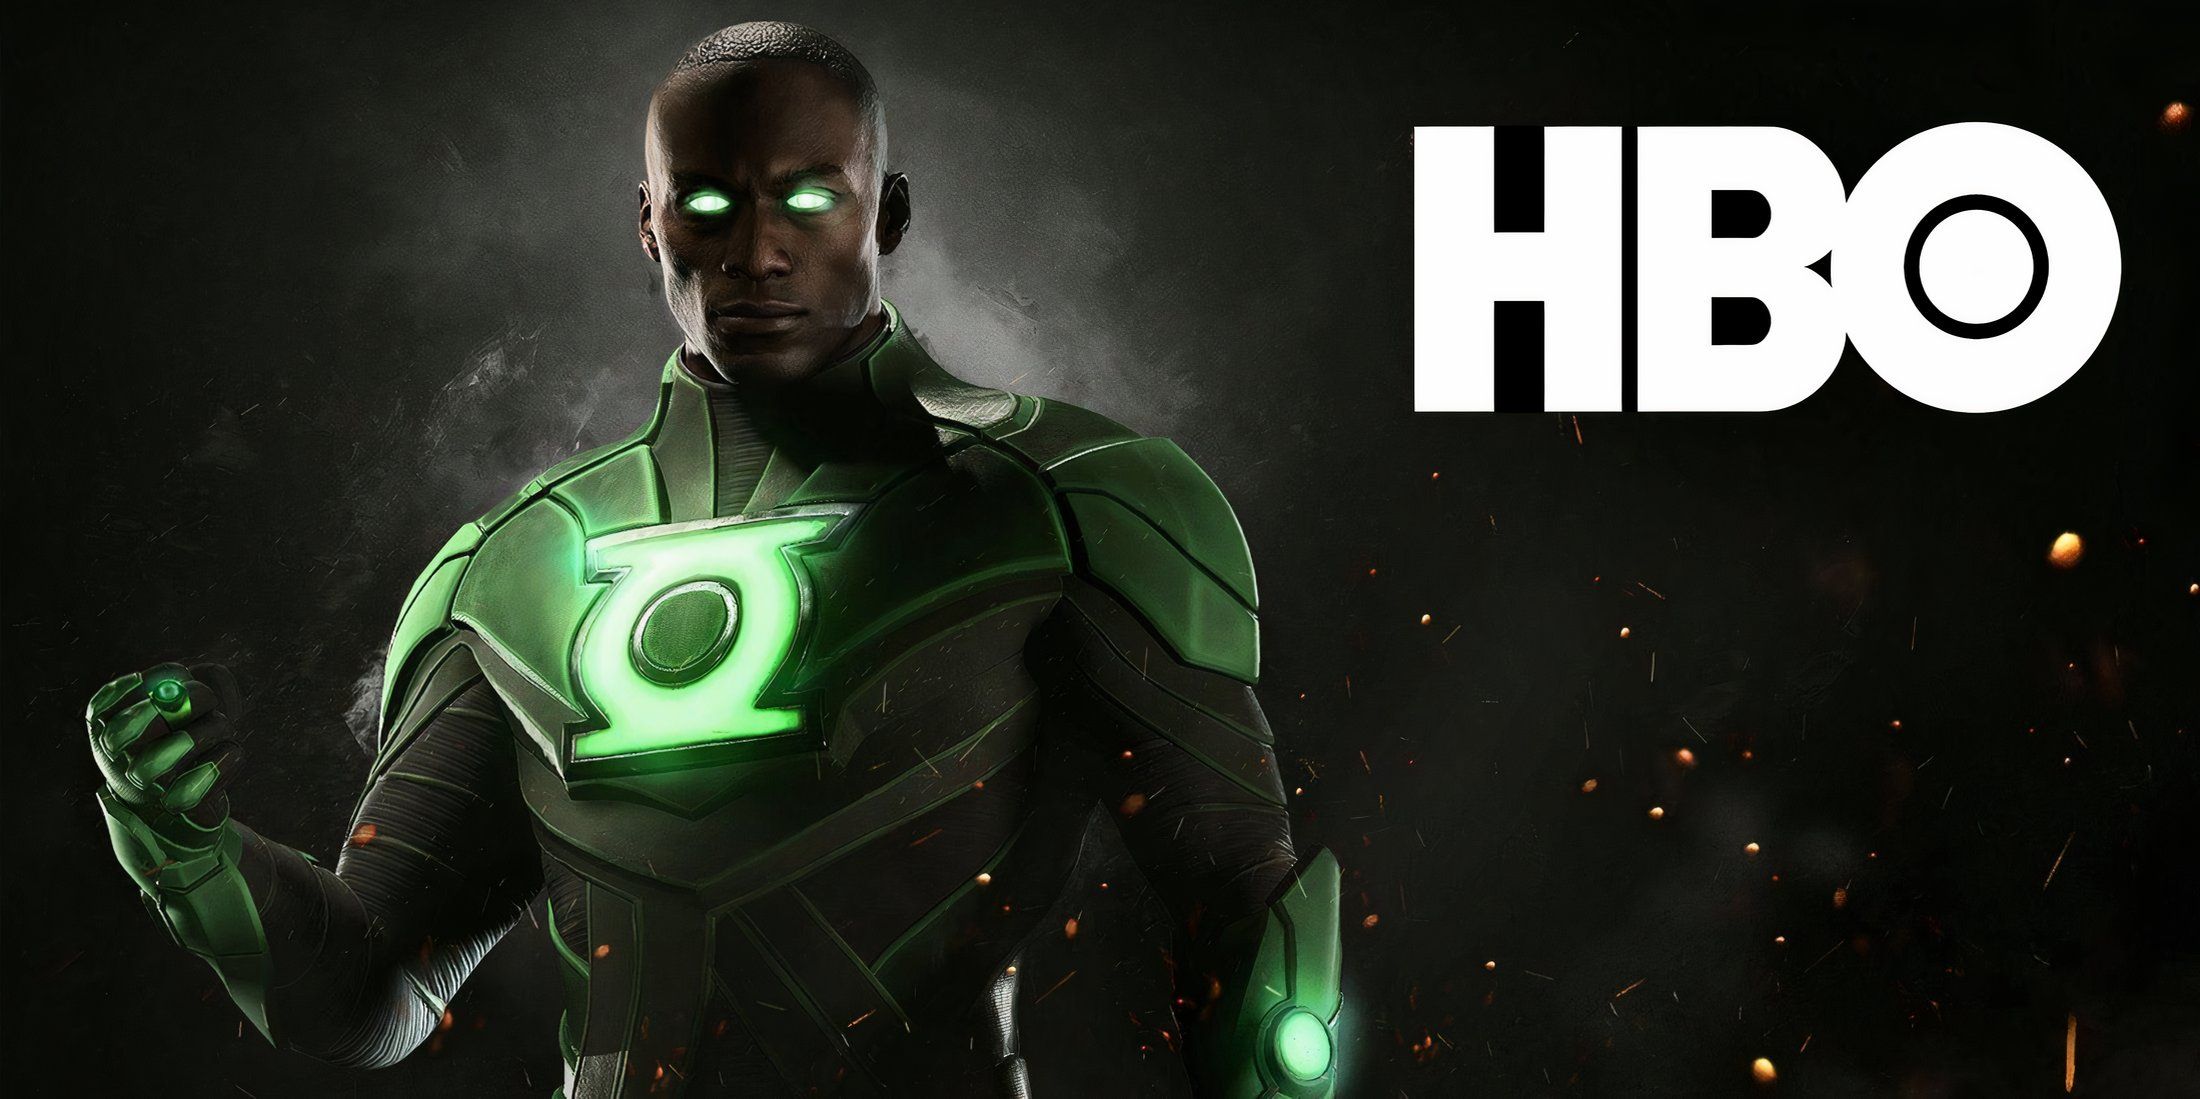 A Potential Green Lantern Game Could Cover Whatever Ground The HBO Series Doesn’t